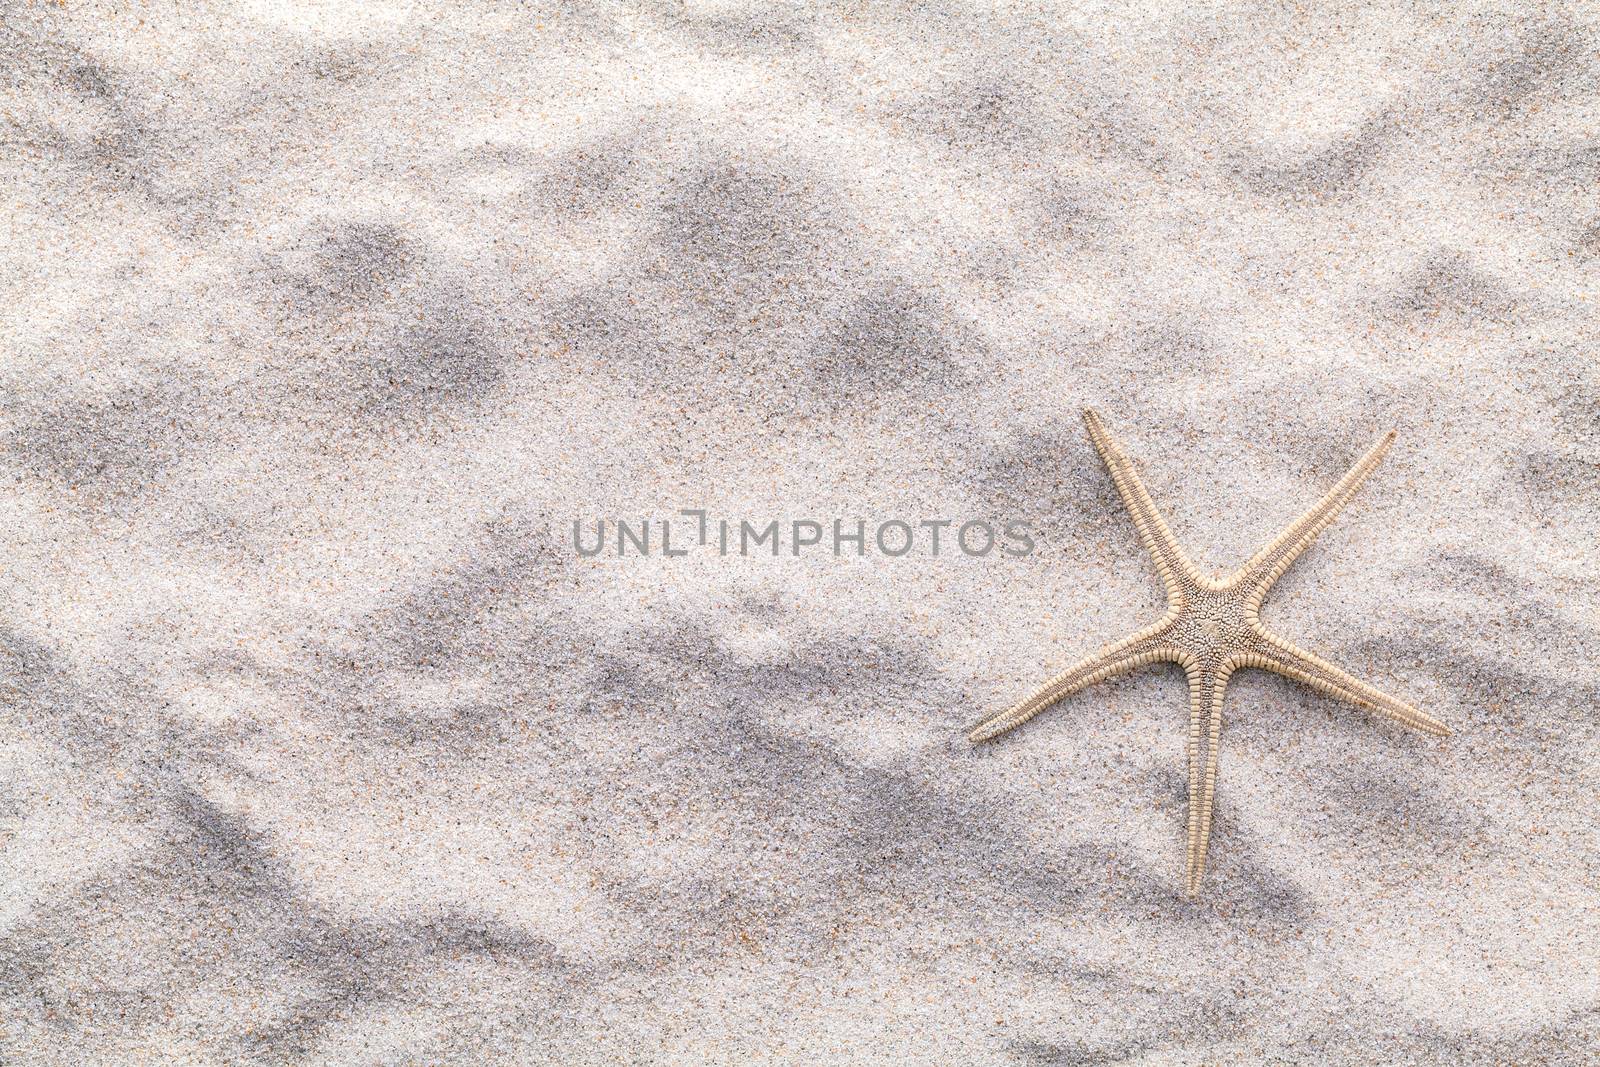 Sea shells,starfish and crab on beach sand for summer and beach concept. Studio shot beach background.